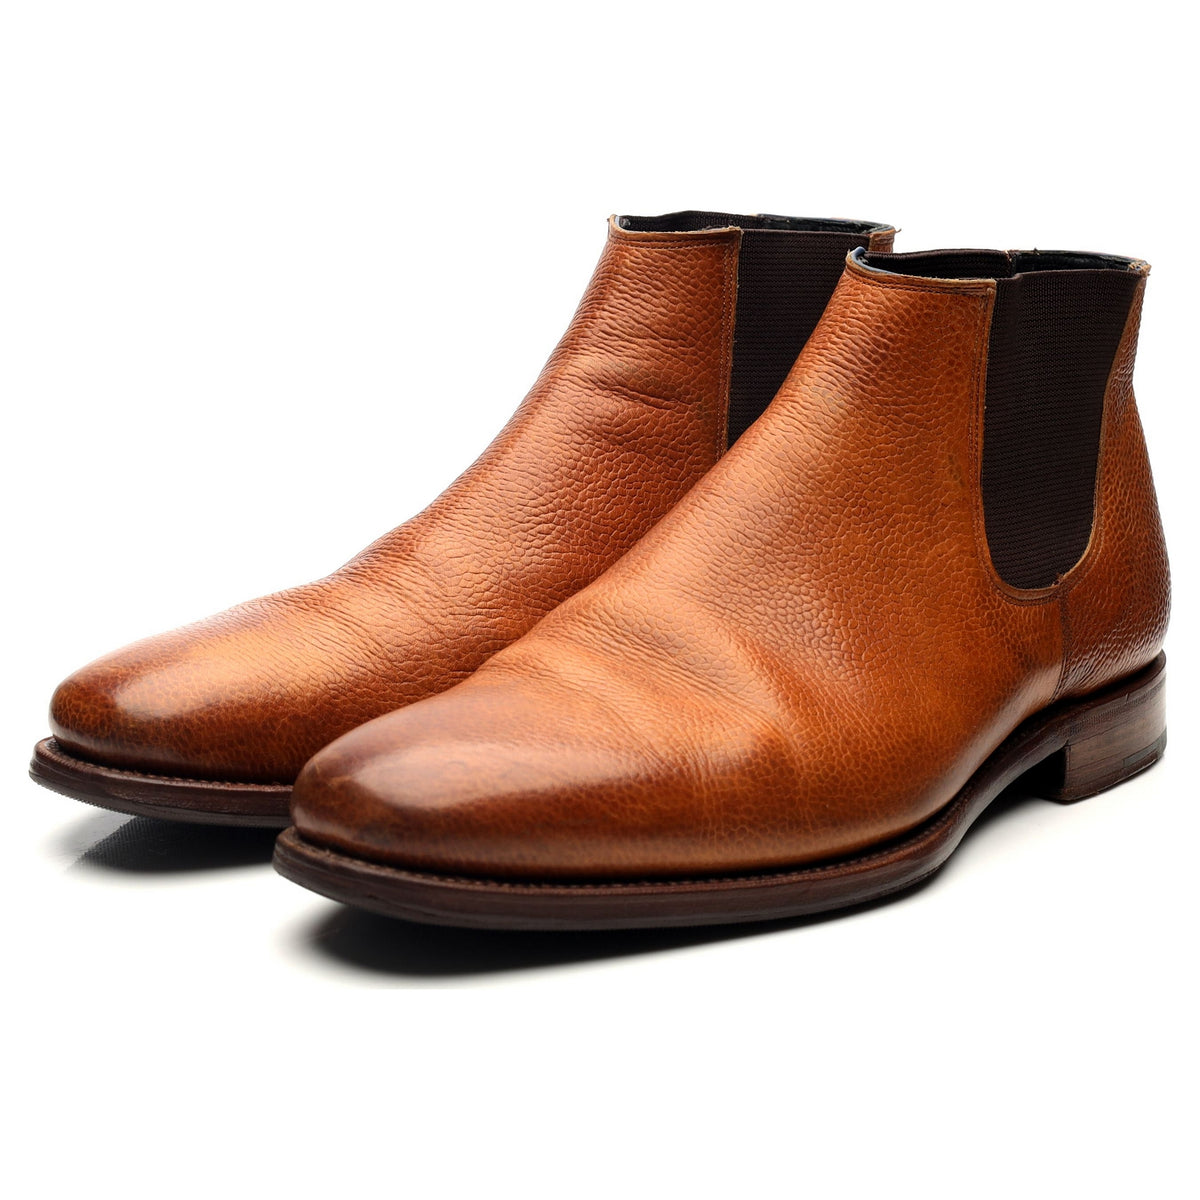 &#39;Black Sole 6&#39; Tan Brown Leather Chelsea Boots UK 8 F